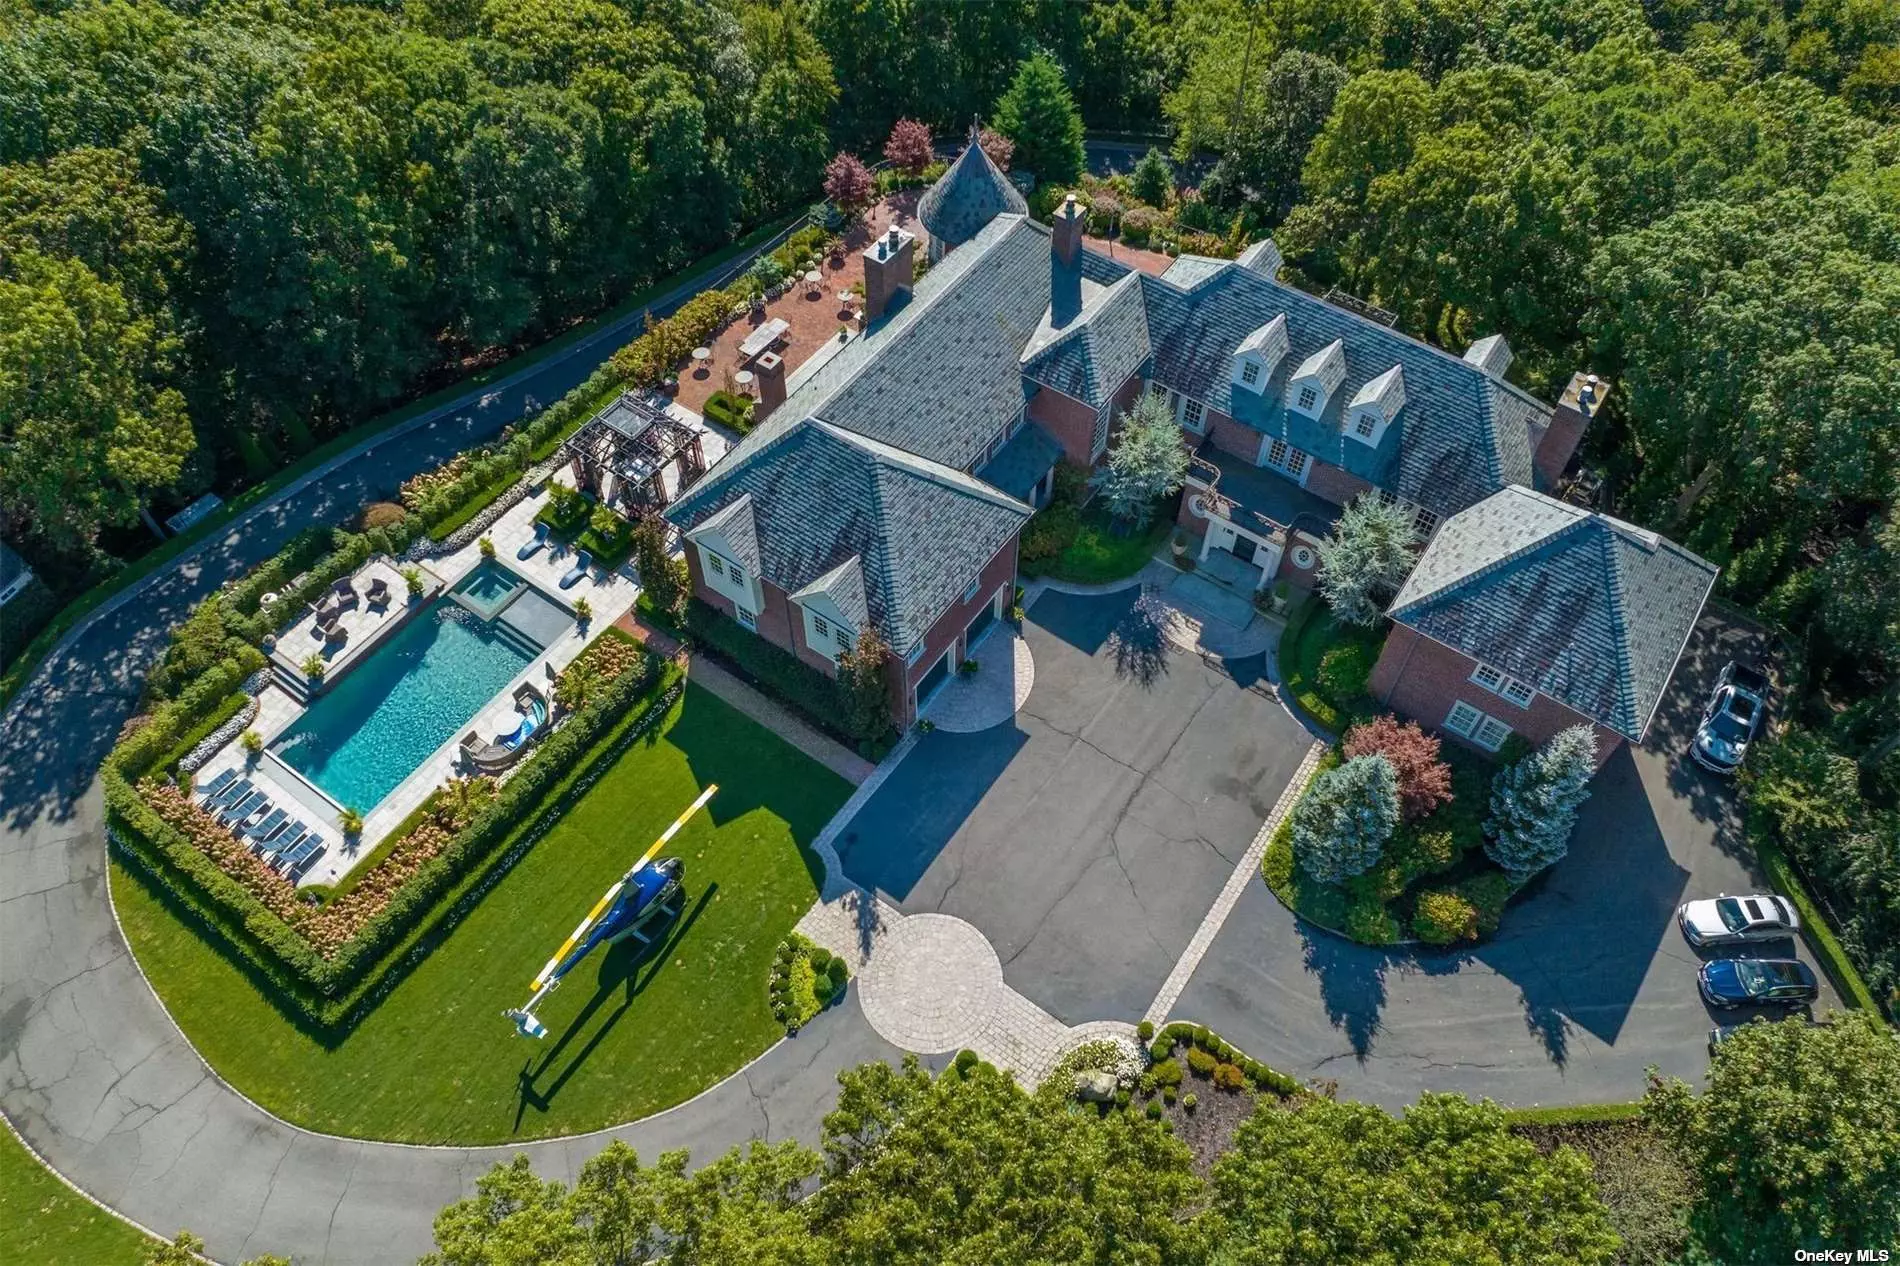 This Gated Majestic Brick Manor, features 6-bedroom, 6-bath, 3-powder rooms and sits at one of the highest points on Long Island surrounded by lush parkland and English gardens for the ultimate in serenity and privacy. This one-of-a-kind property has its own, FAA recognized, helipad which allows you the luxury to fly over traffic to NYC or the Hamptons with ease. This Estates sophisticated elegance depicts exquisite attention to every detail featured, from custom mill work, exotic quarter sawn wood floors, imported marble with everything covered from its energy efficient geo-thermal heating & cooling, radiant heat throughout, gourmet EIK, palatial principles-suite, expansive additional living quarters, 4 fireplaces, ornamental iron details with security system, heated driveway and much more. This home is truly an entertainer&rsquo;s paradise with in-ground heated pool & spa w/ salt system and waterfalls, starlit home theater, indoor squash & basketball court, gym, game room, and workshop .